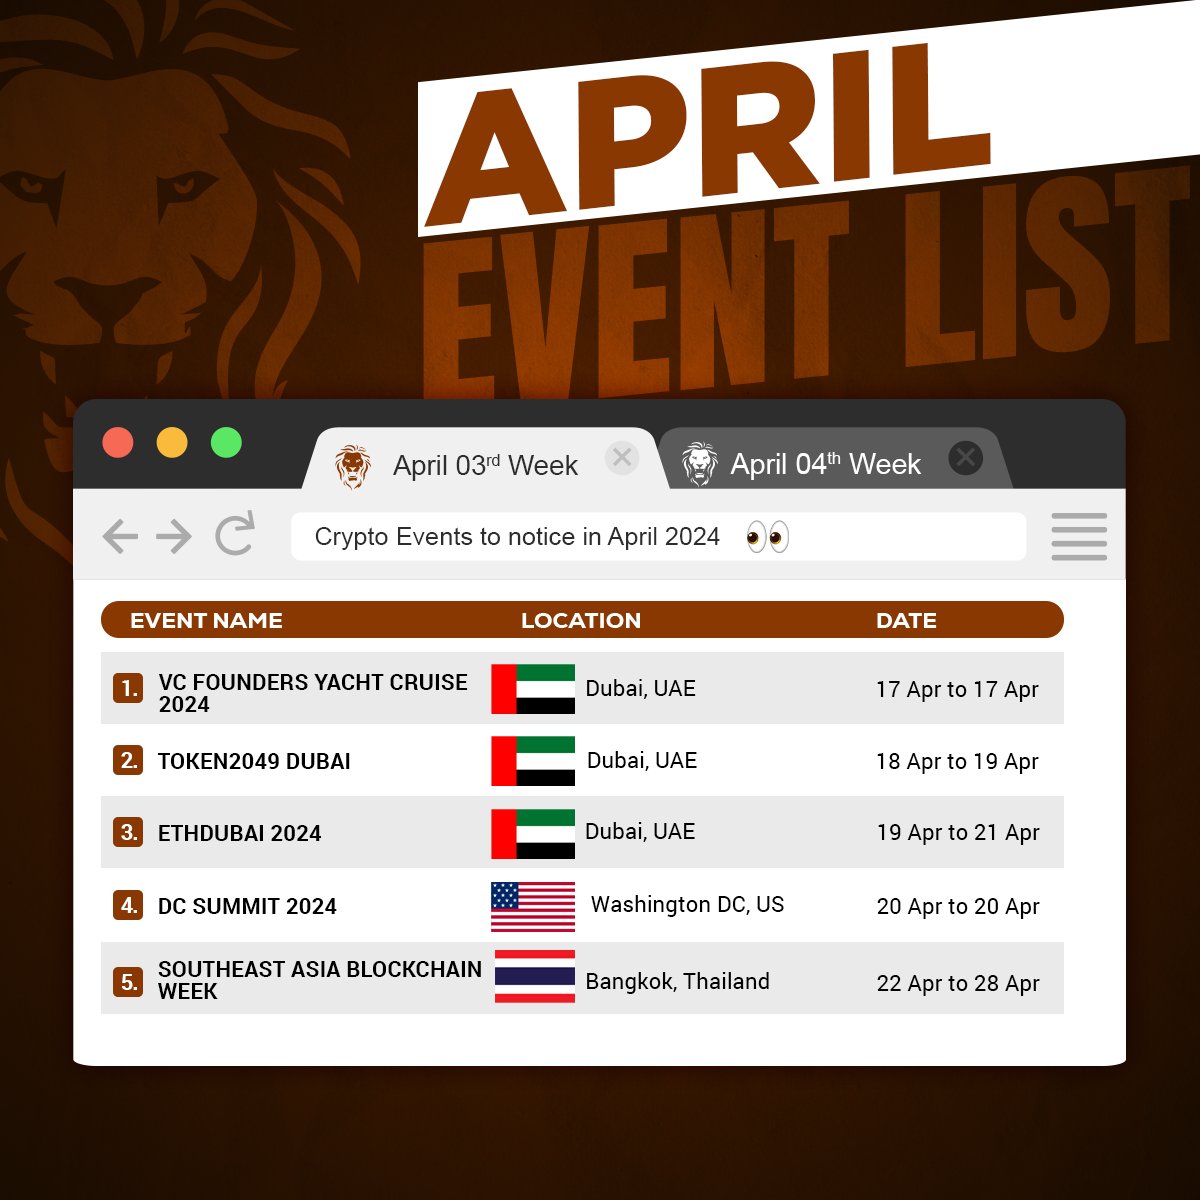 🔥#CryptoEvents To Notice In April🔥

1 #VCFOUNDERS YACHT CRUISE 2024
2 #TOKEN2049DUBAI
3 #ETHDUBAI2024
4 #DCSUMMIT2024
5 #SOUTHEASTASIA BLOCKCHAIN WEEK

📅Read More Events: coingabbar.com/en/coin-events…

#Event #CryptoEvent #cryptocurrency #blockchain #Conference #Web3 #Web3Event